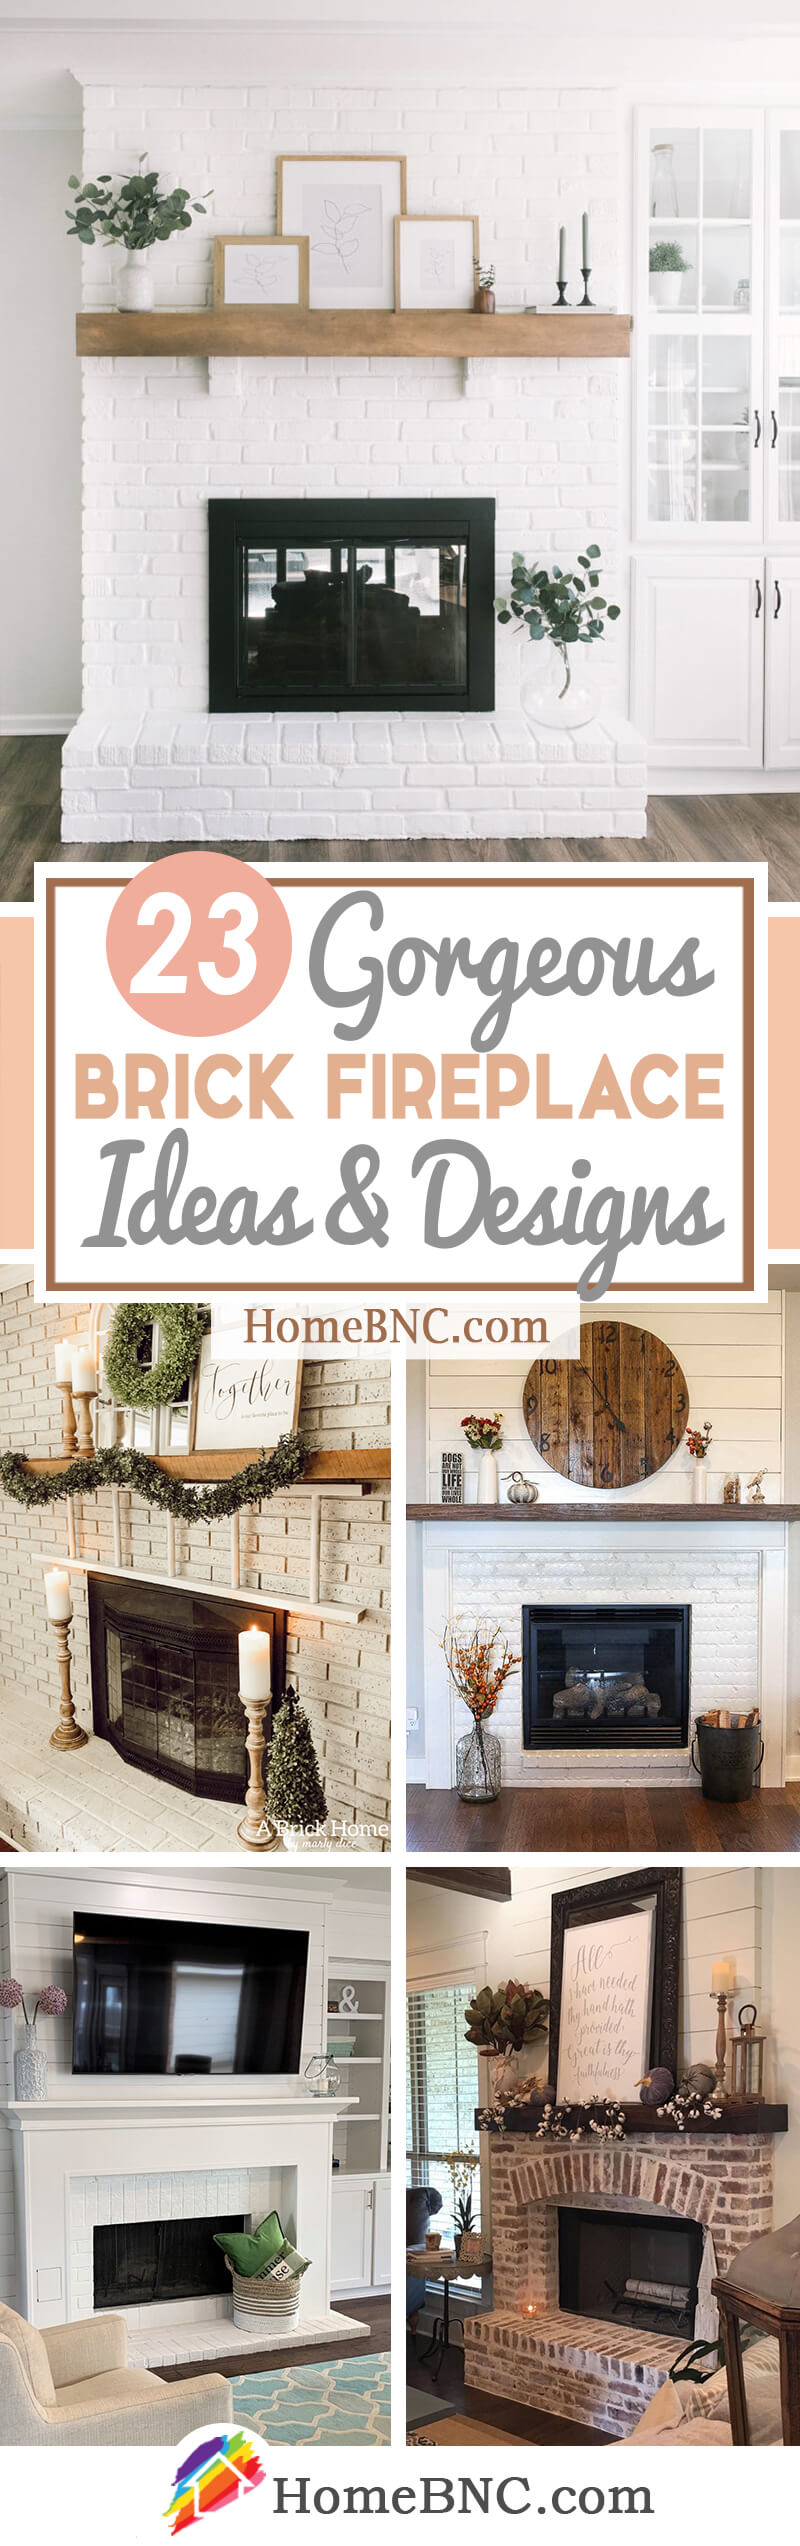 23 Best Brick Fireplace Ideas To Make, How Can I Make My Red Brick Fireplace Look Better